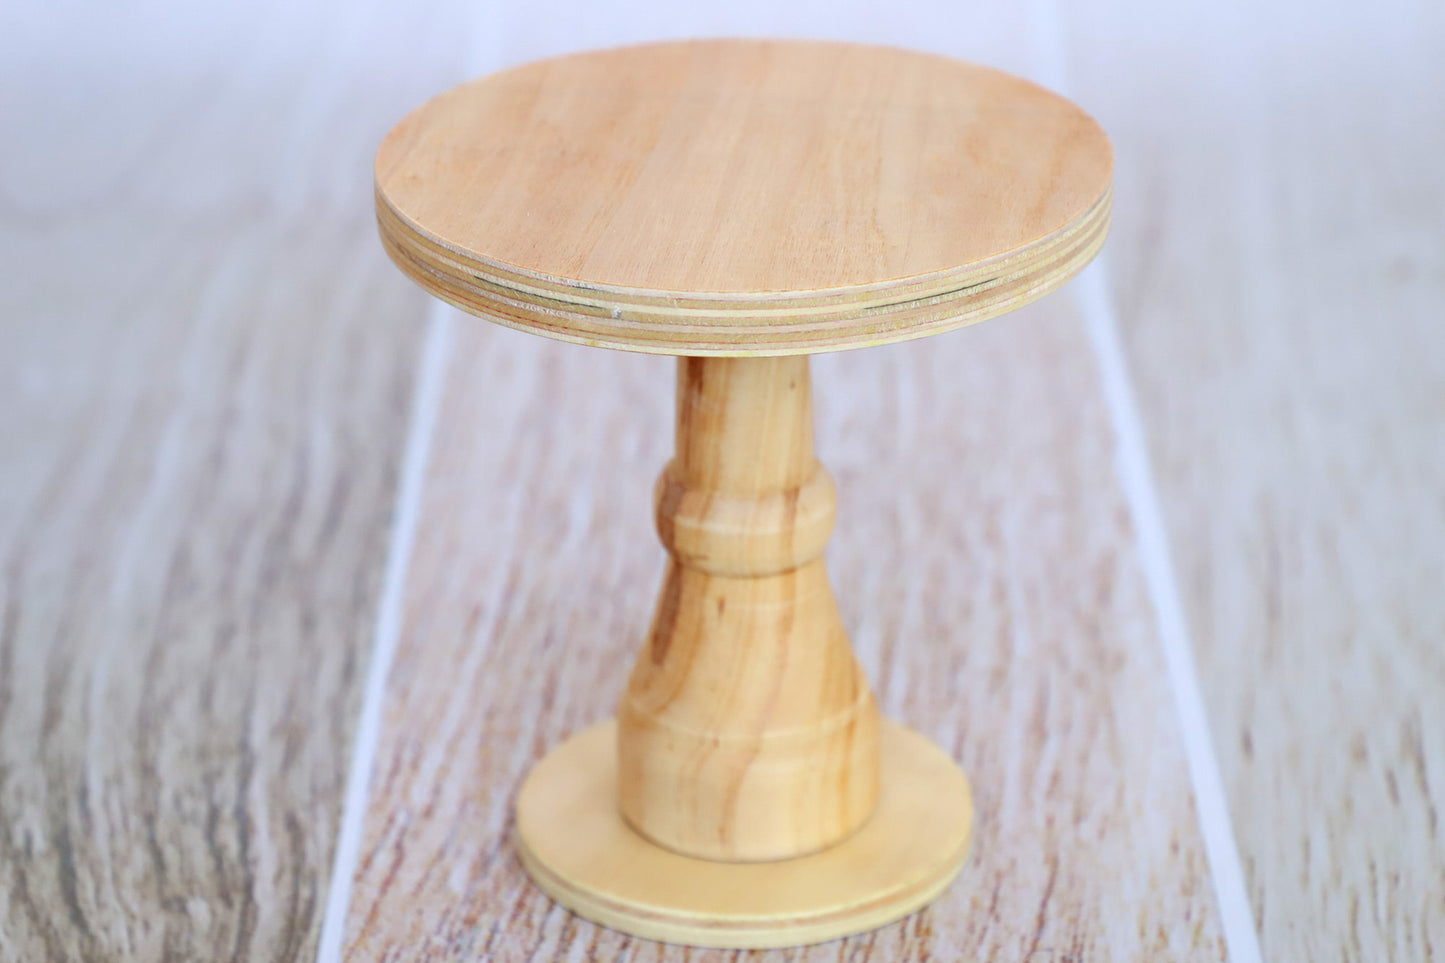 Rustic Cake Stand/Nightstand - 6.5in Tall - Natural